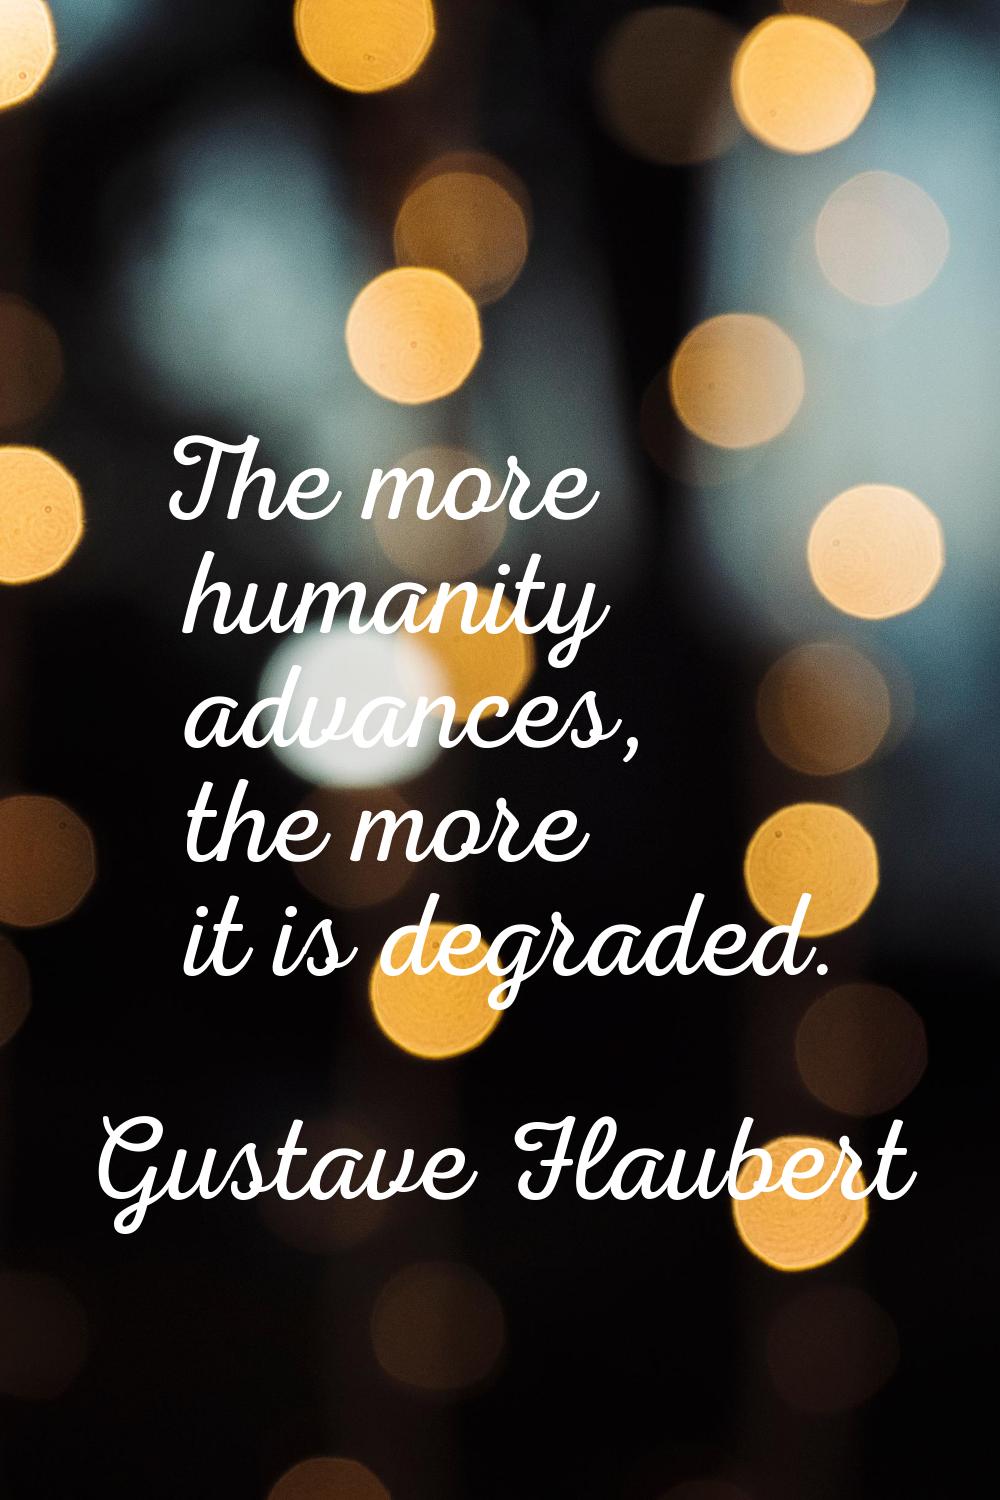 The more humanity advances, the more it is degraded.